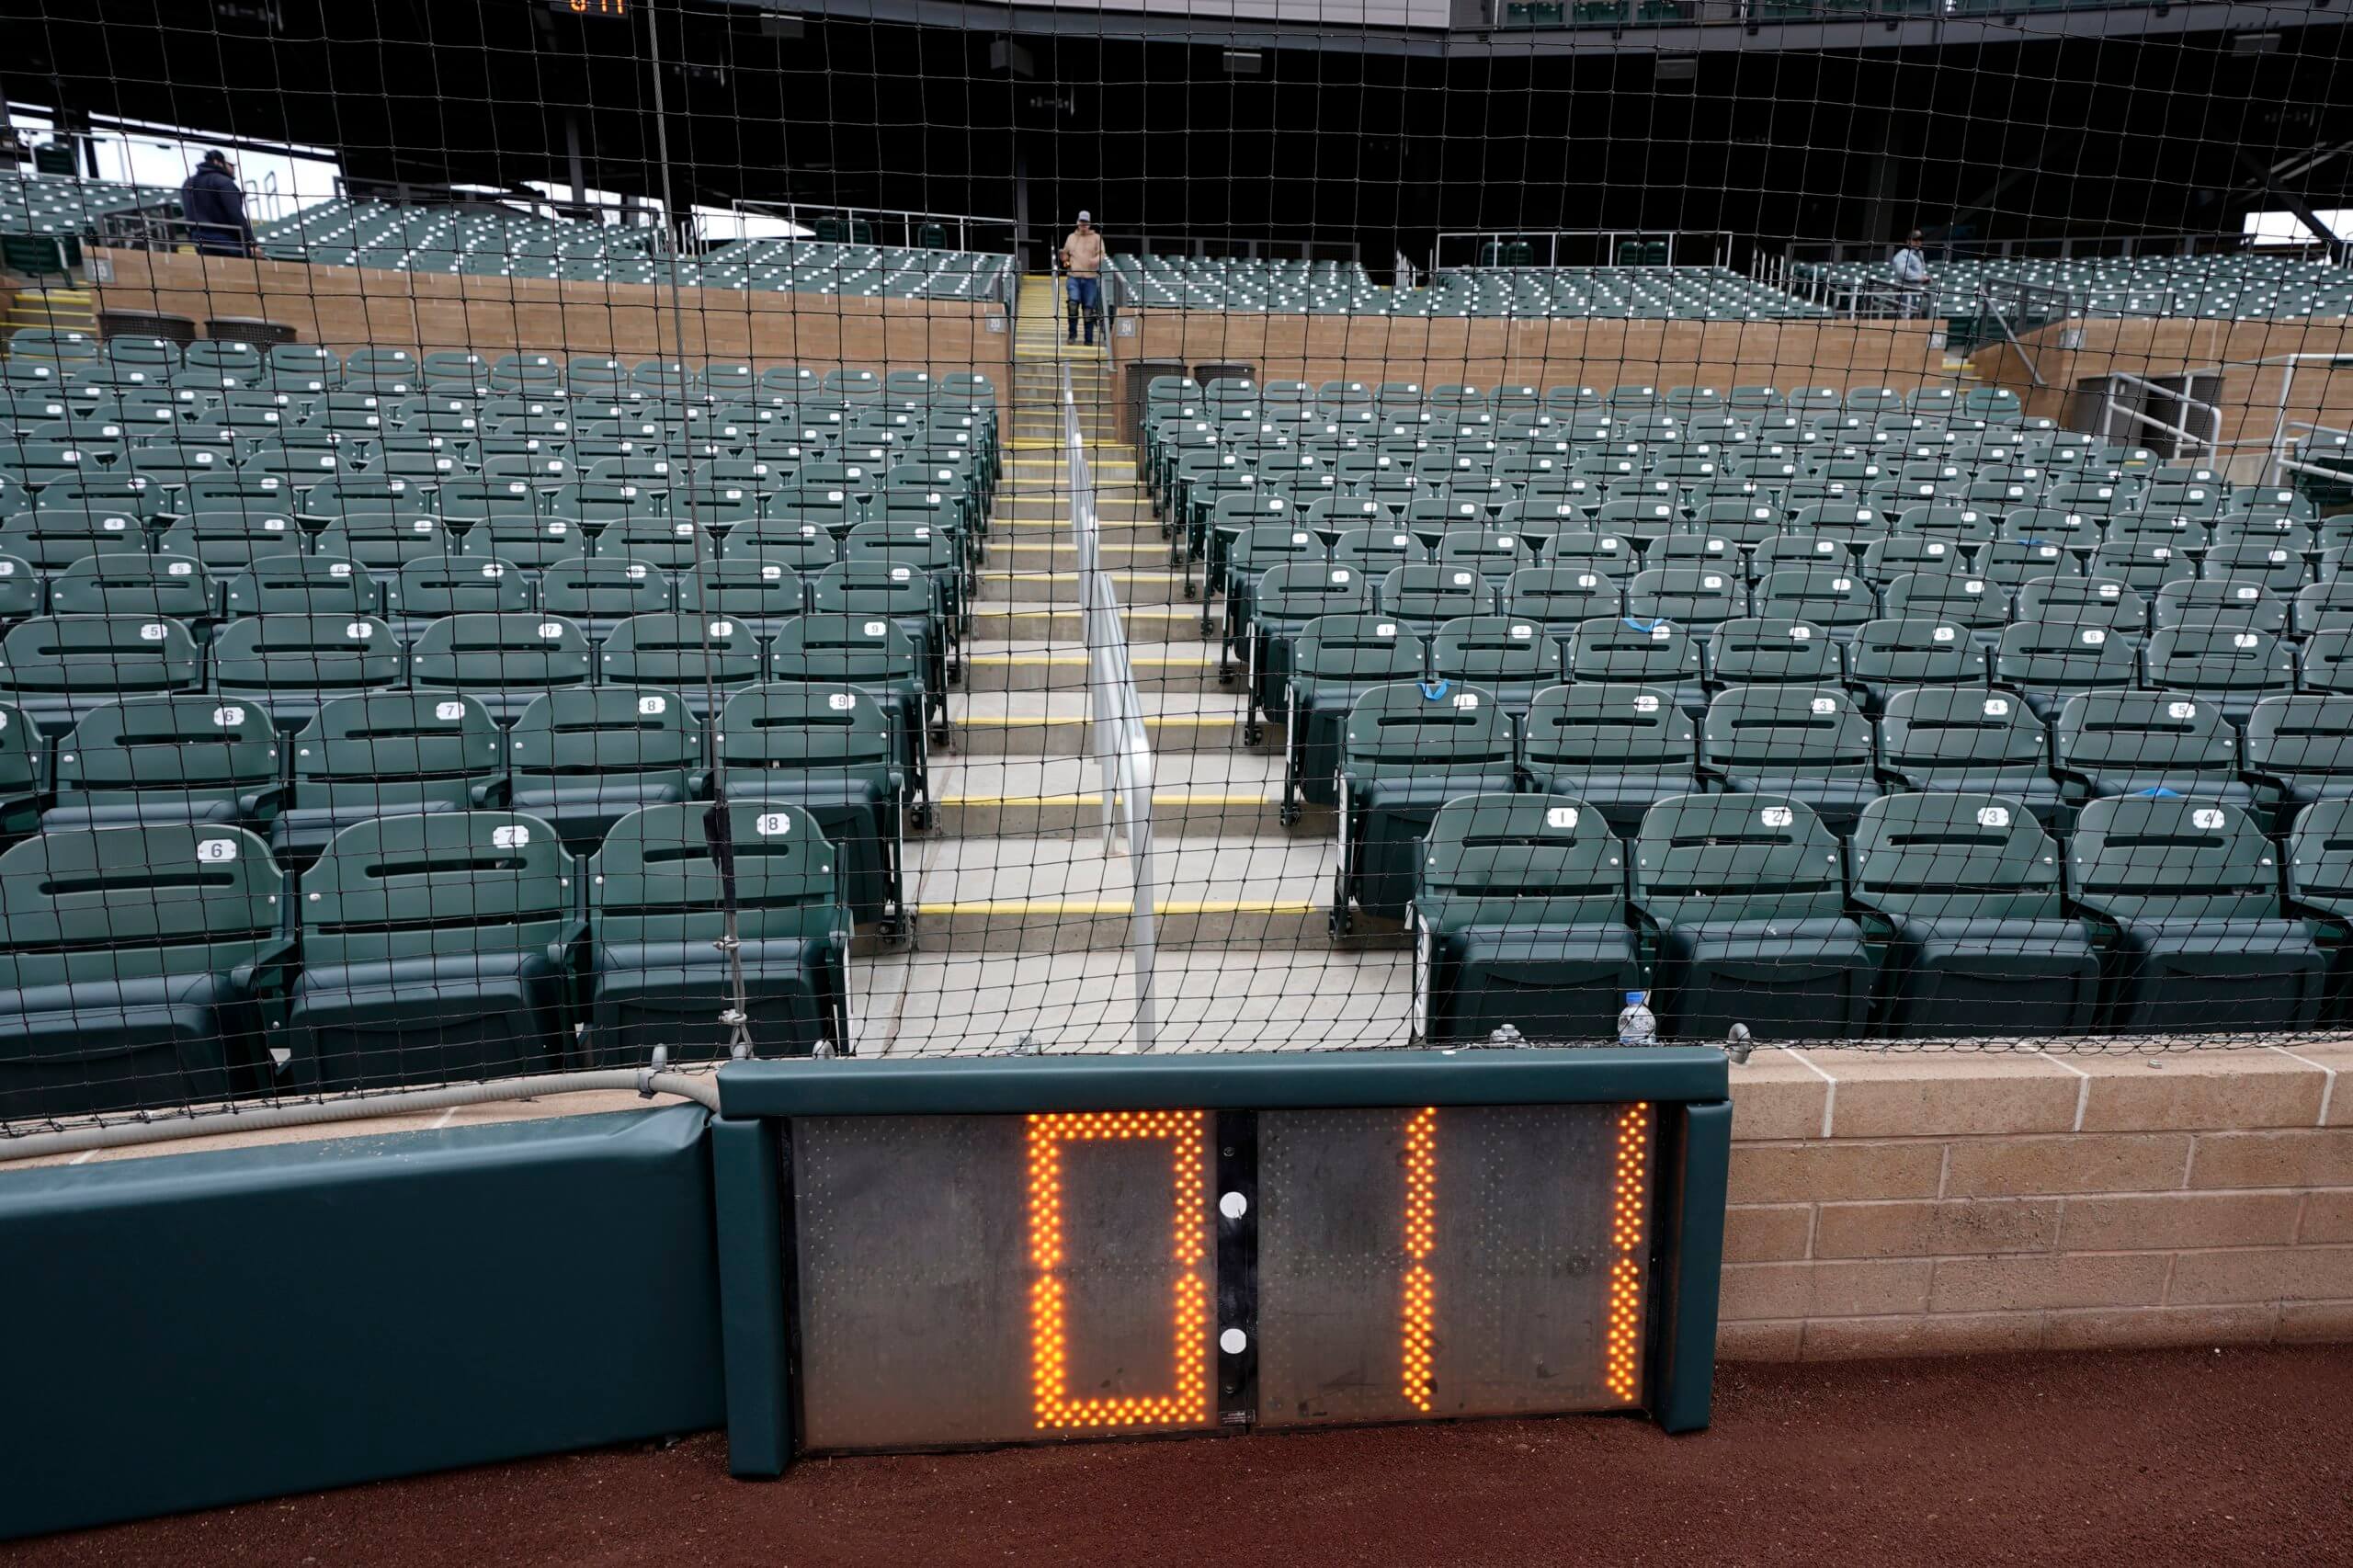 Opinion: Baseball's new pitch clock is the best thing since sliced